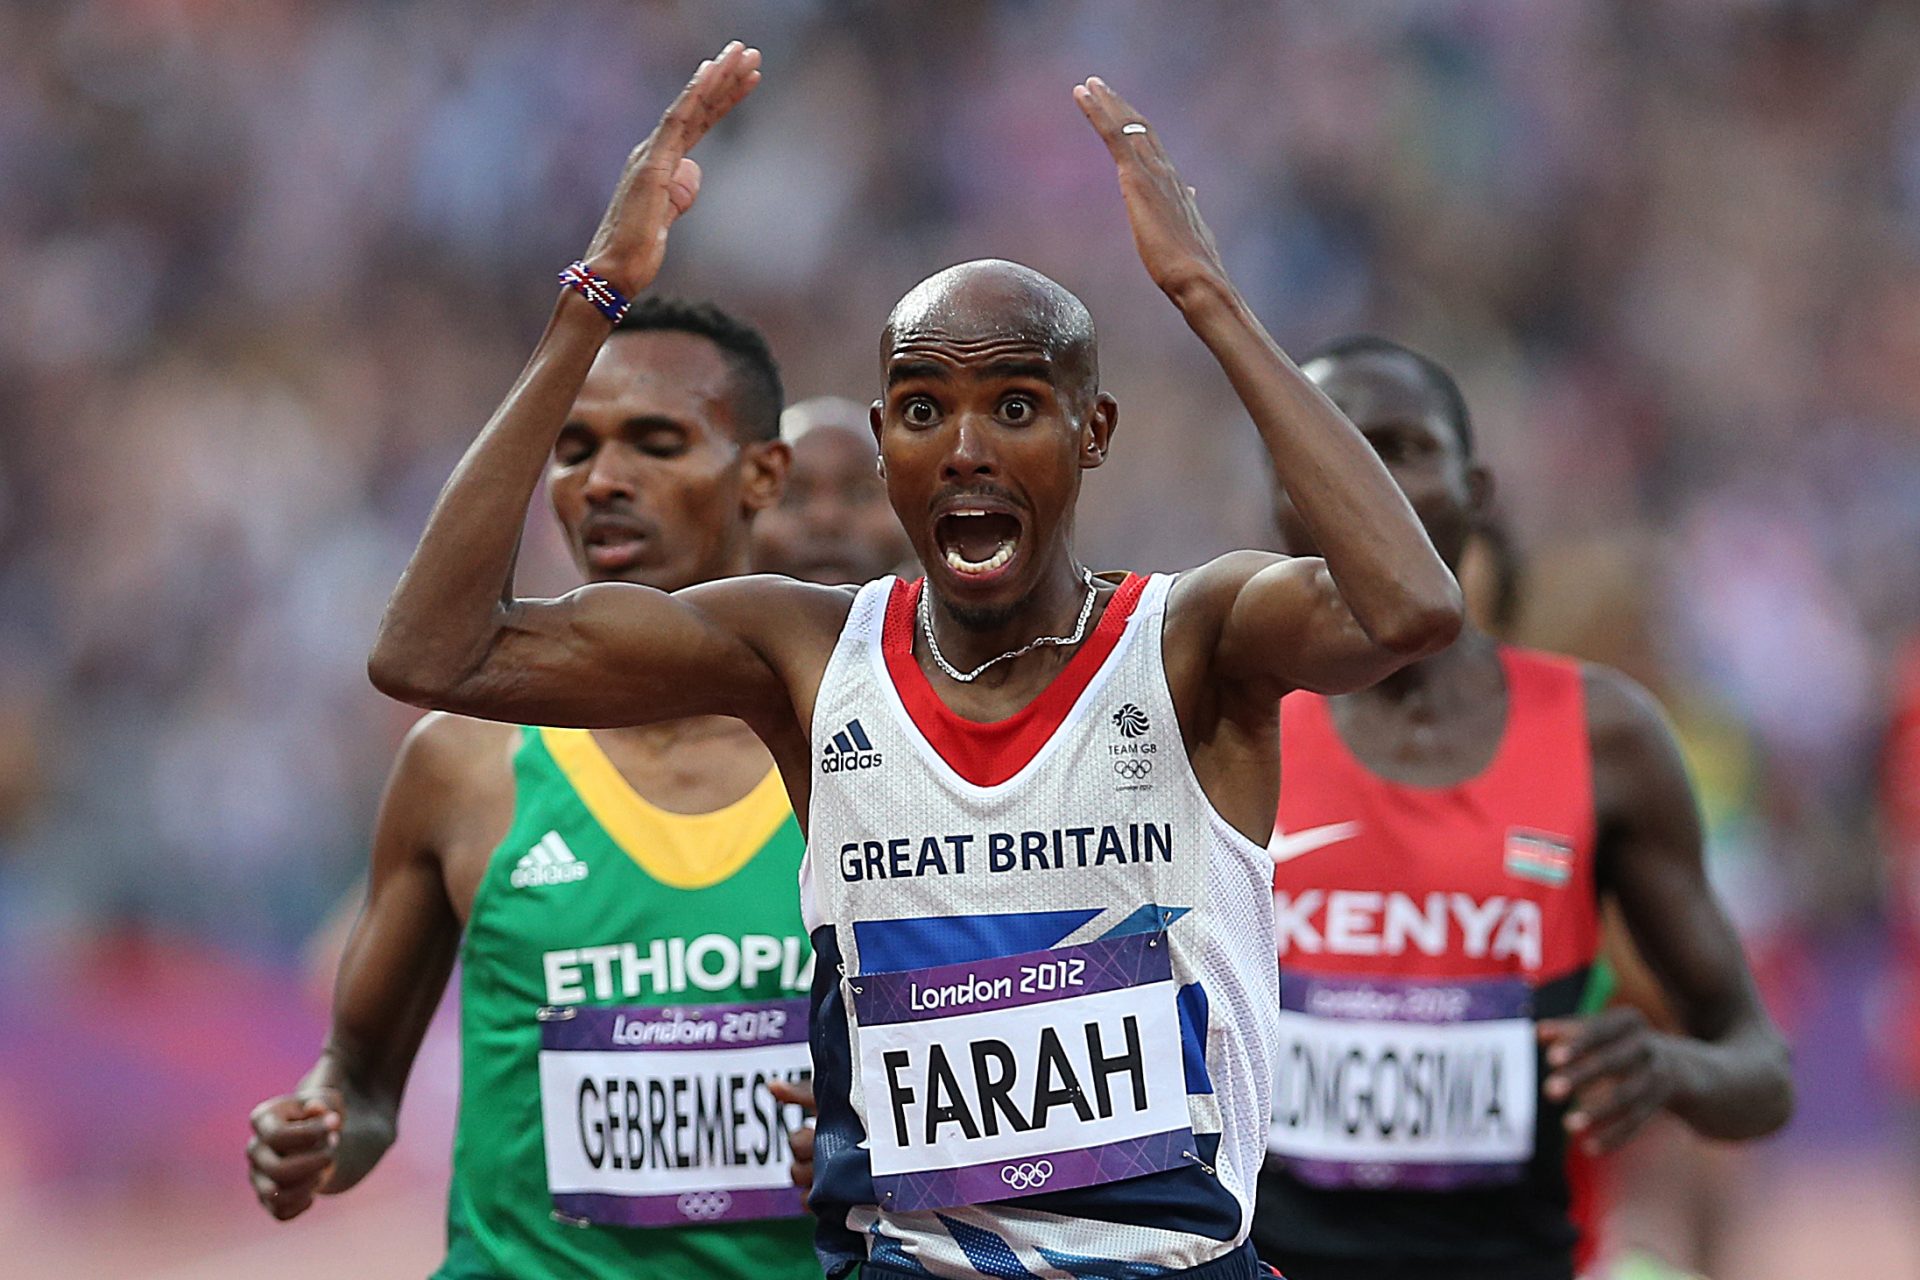 Mo Farah: The man who escaped genocide and became an Olympic hero